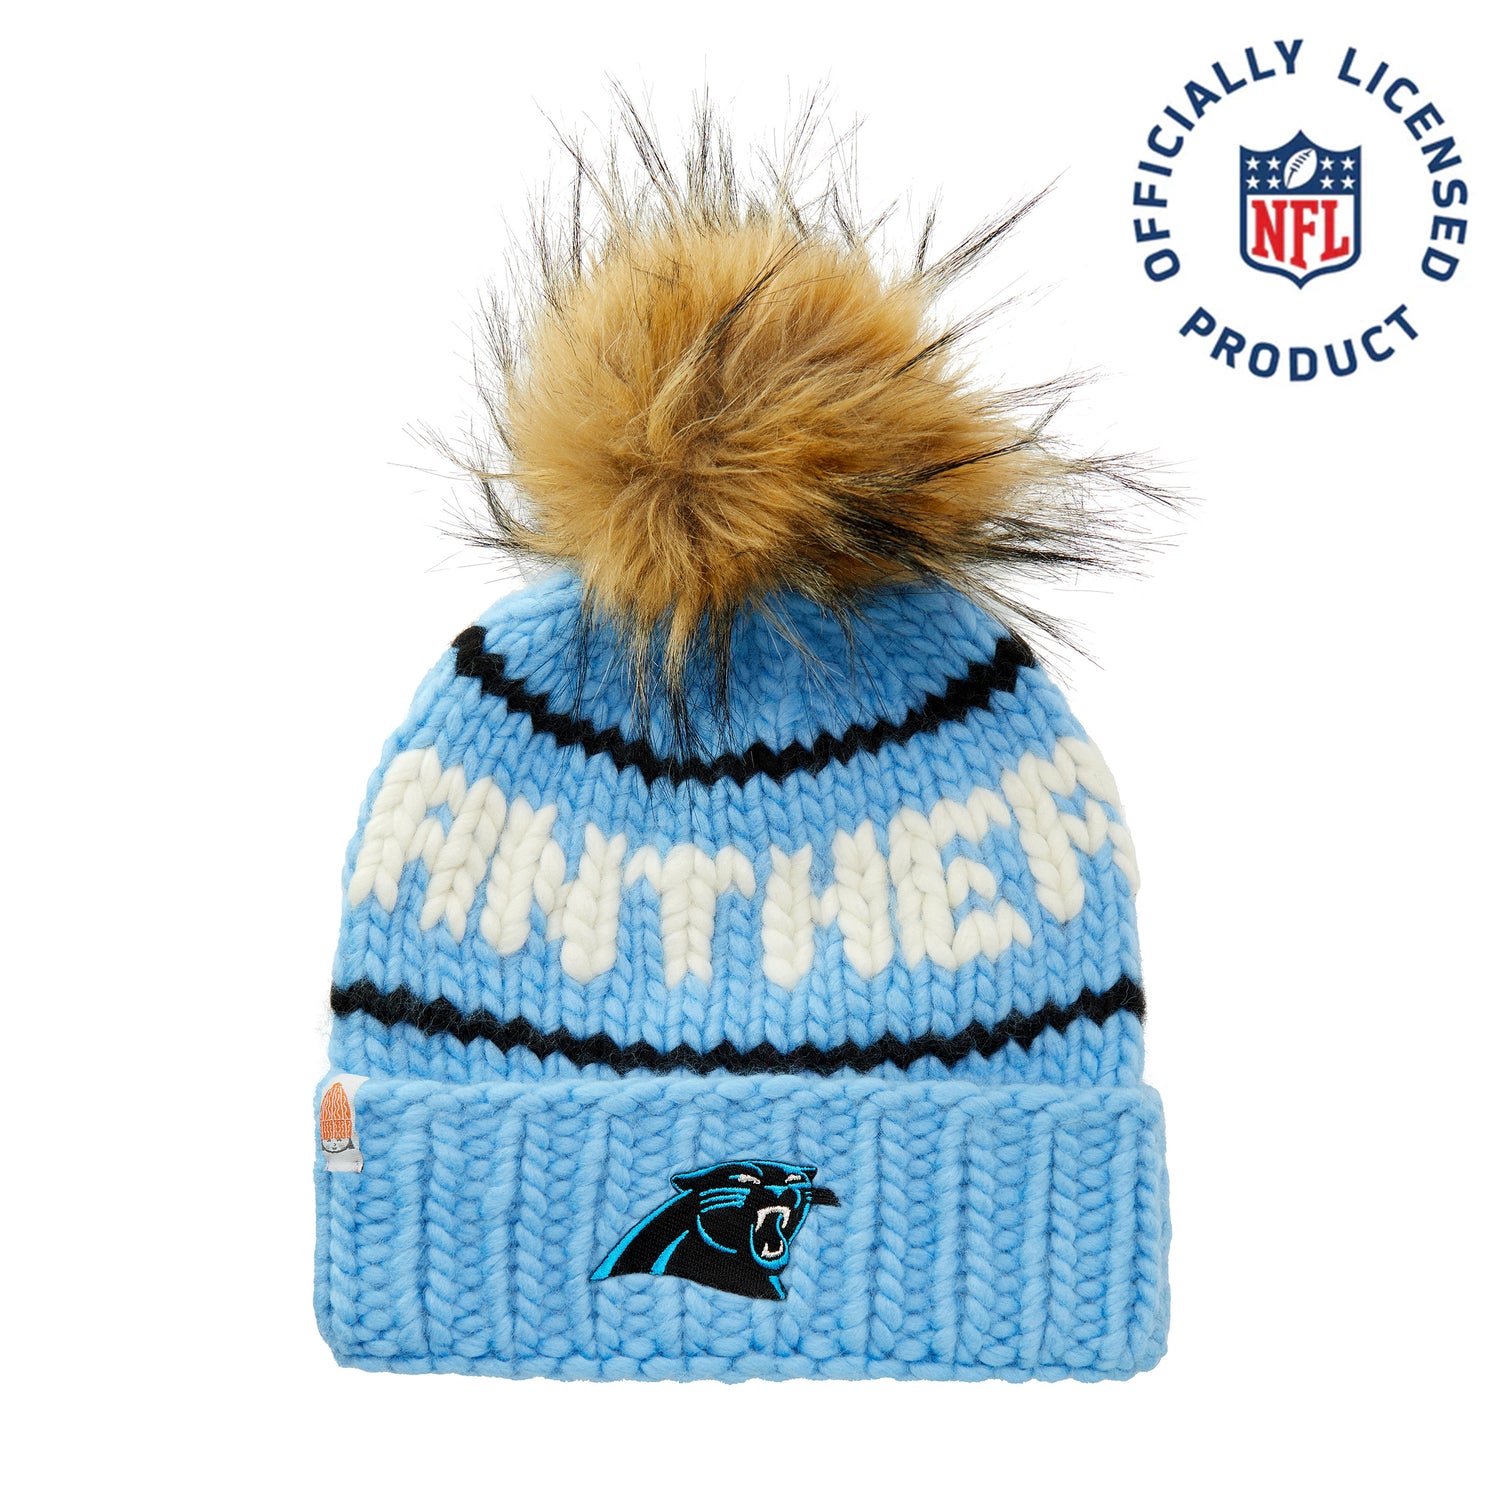 The Panthers NFL Beanie with Faux Fur Pom